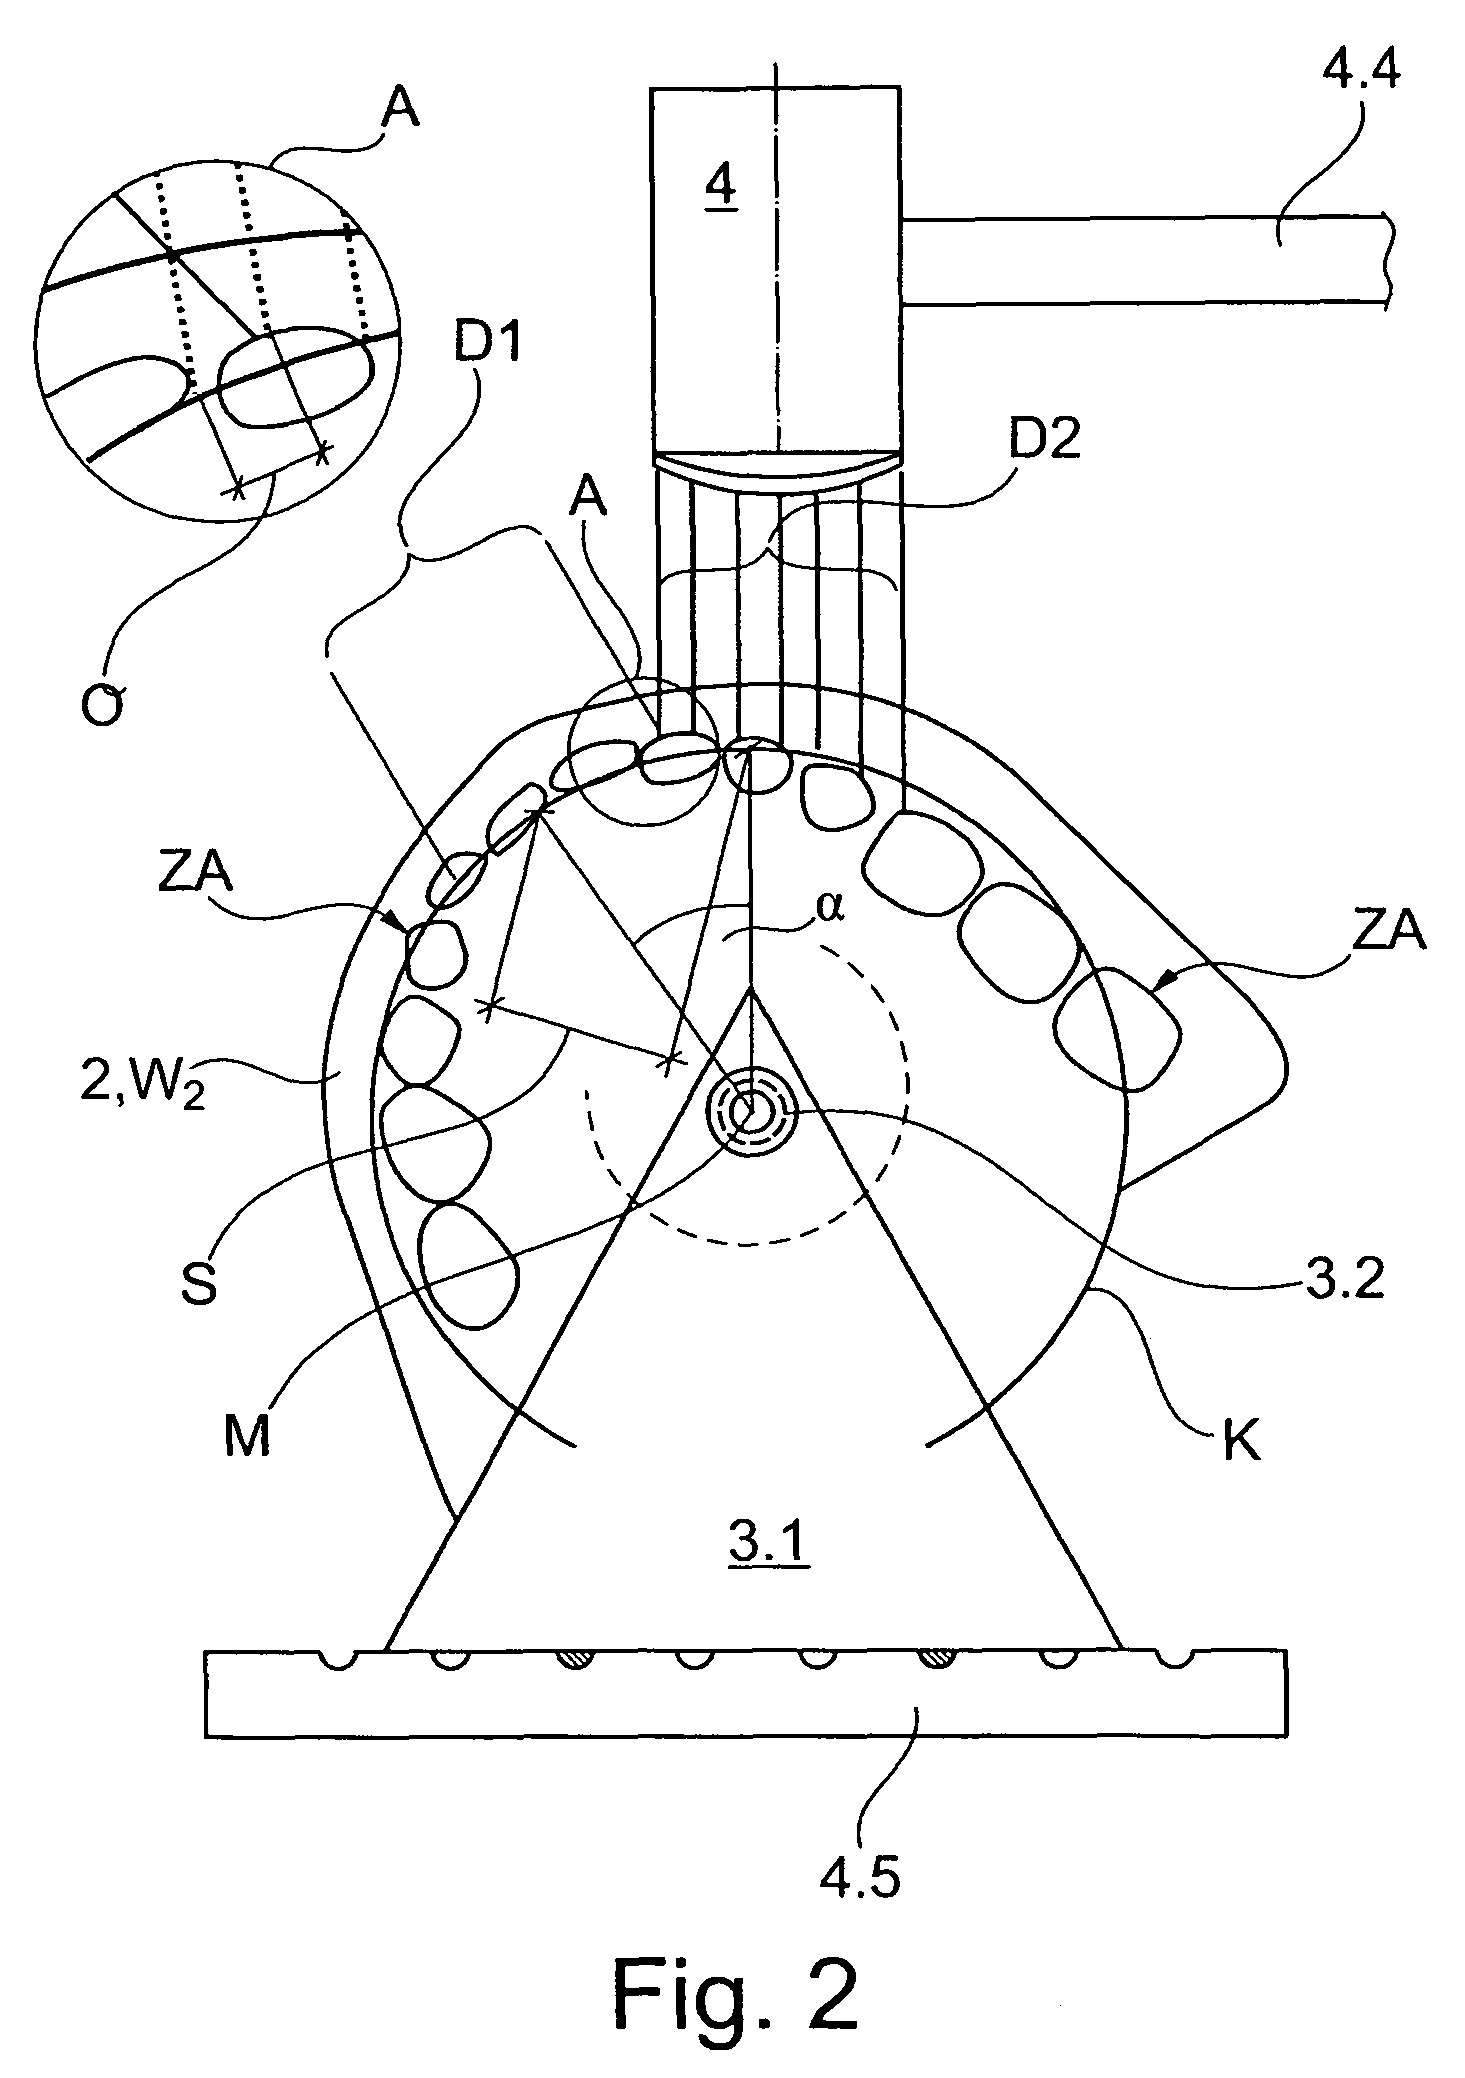 Measuring device and method for the 3D-measurement of dental models